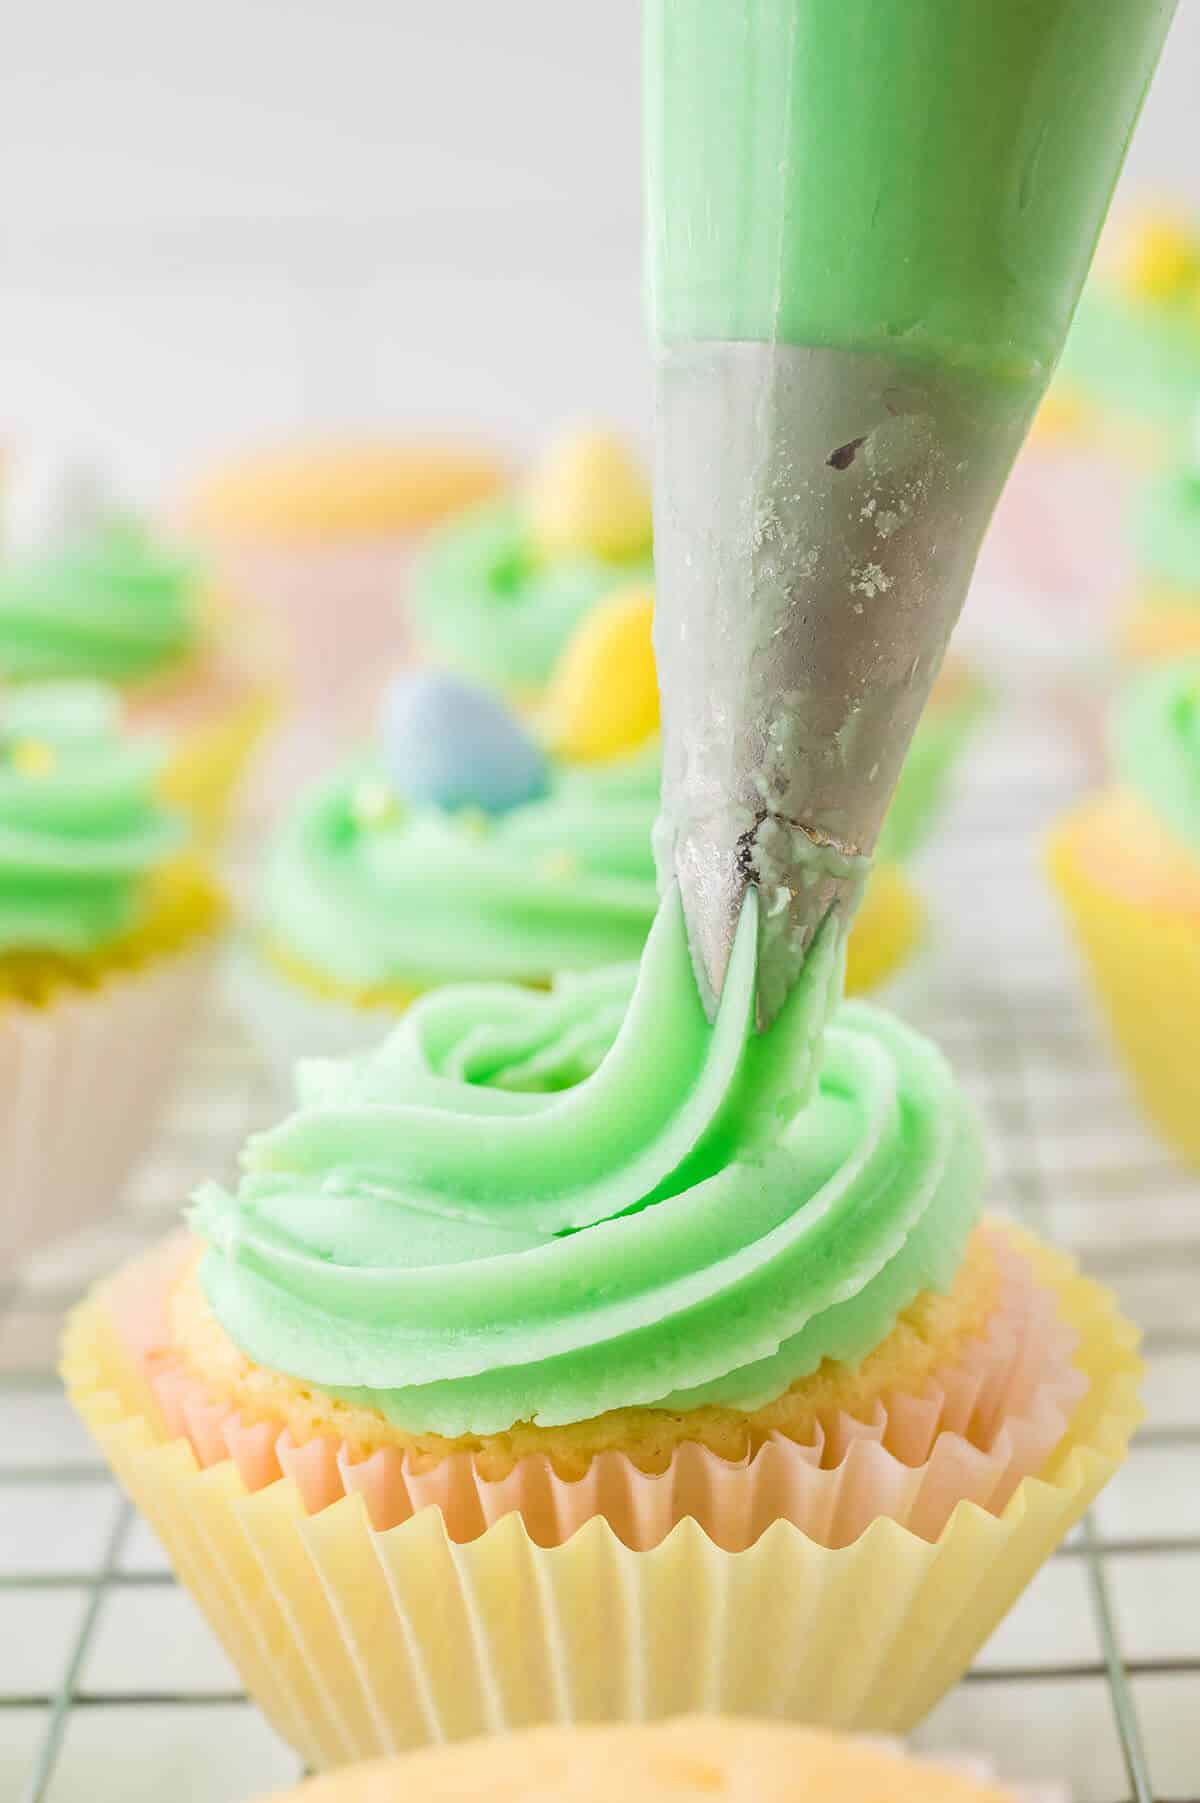 Piping green buttercream frosting on cupcakes.